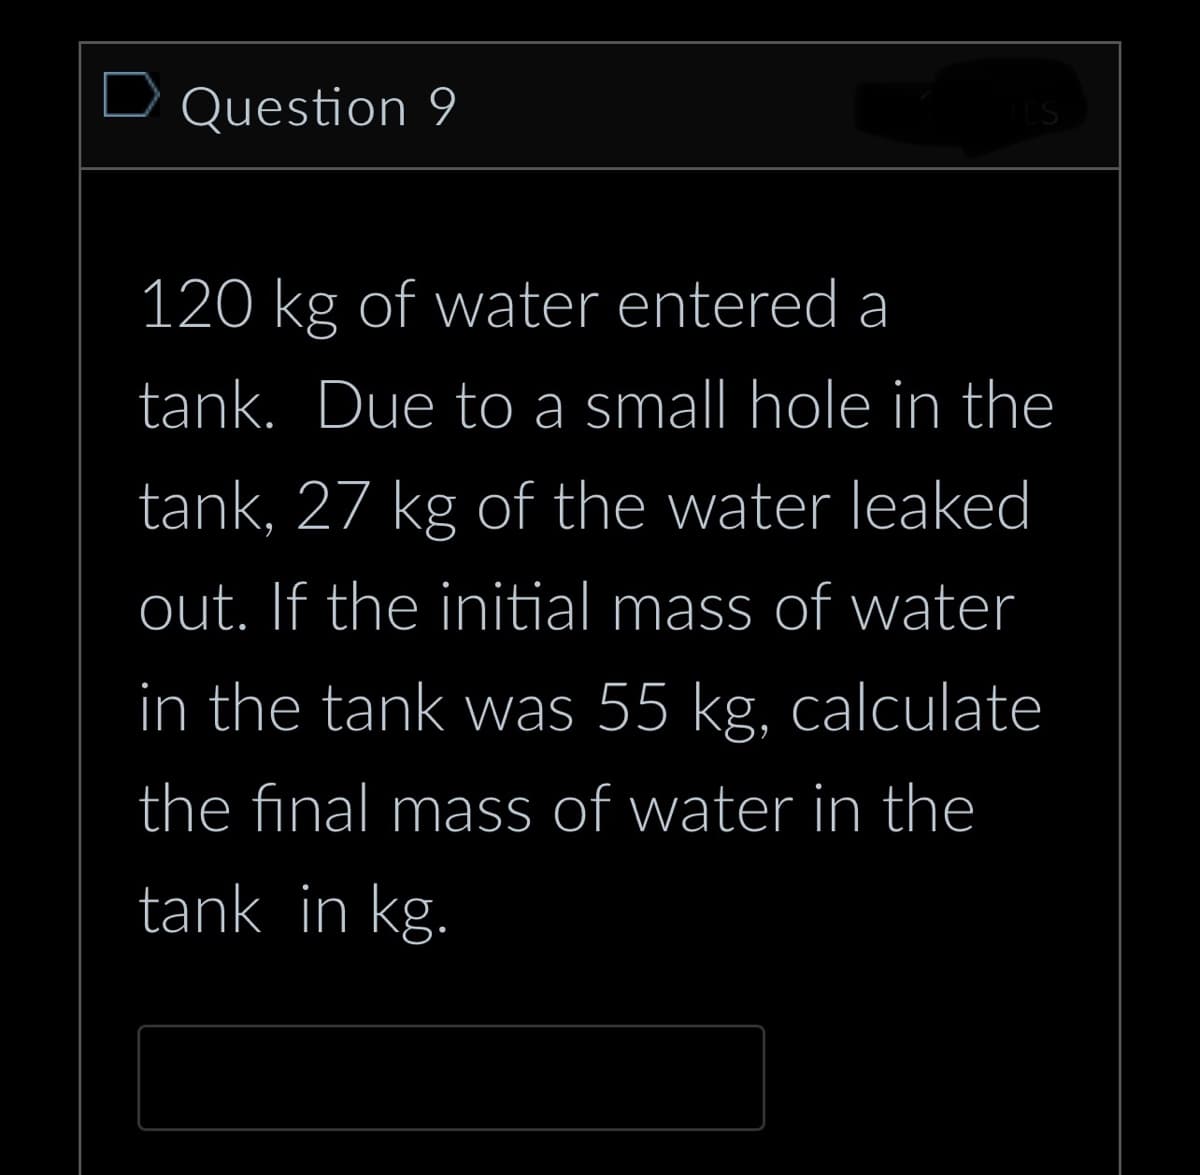 Question 9
ITS
120 kg of water entered a
tank. Due to a small hole in the
tank, 27 kg of the water leaked
out. If the initial mass of water
in the tank was 55 kg, calculate
the final mass of water in the
tank in kg.